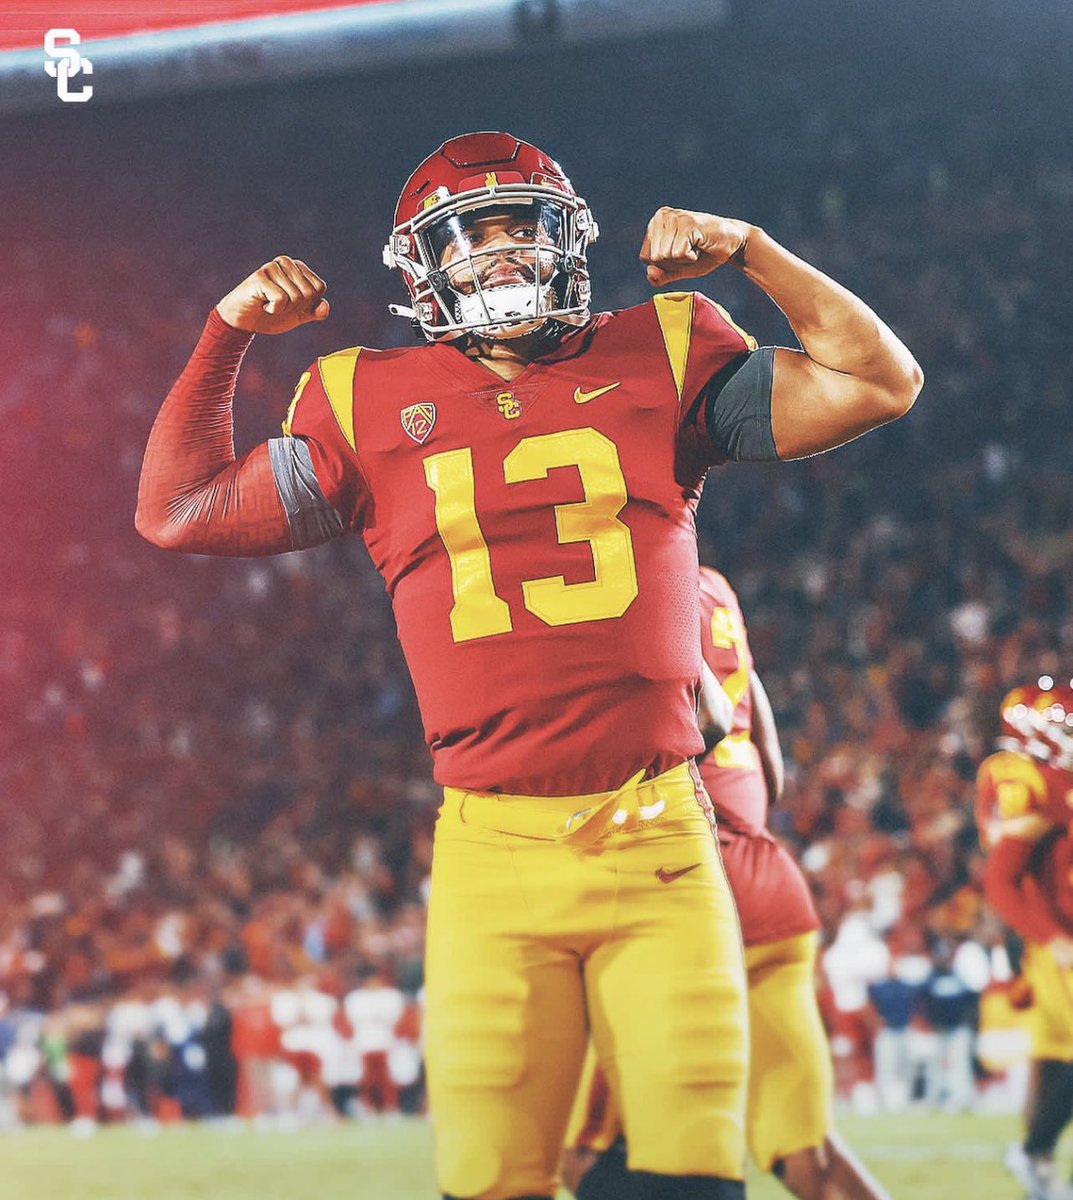 The best player in the nation is back this Saturday!! #gameweek #fighton✌️ @CALEBcsw